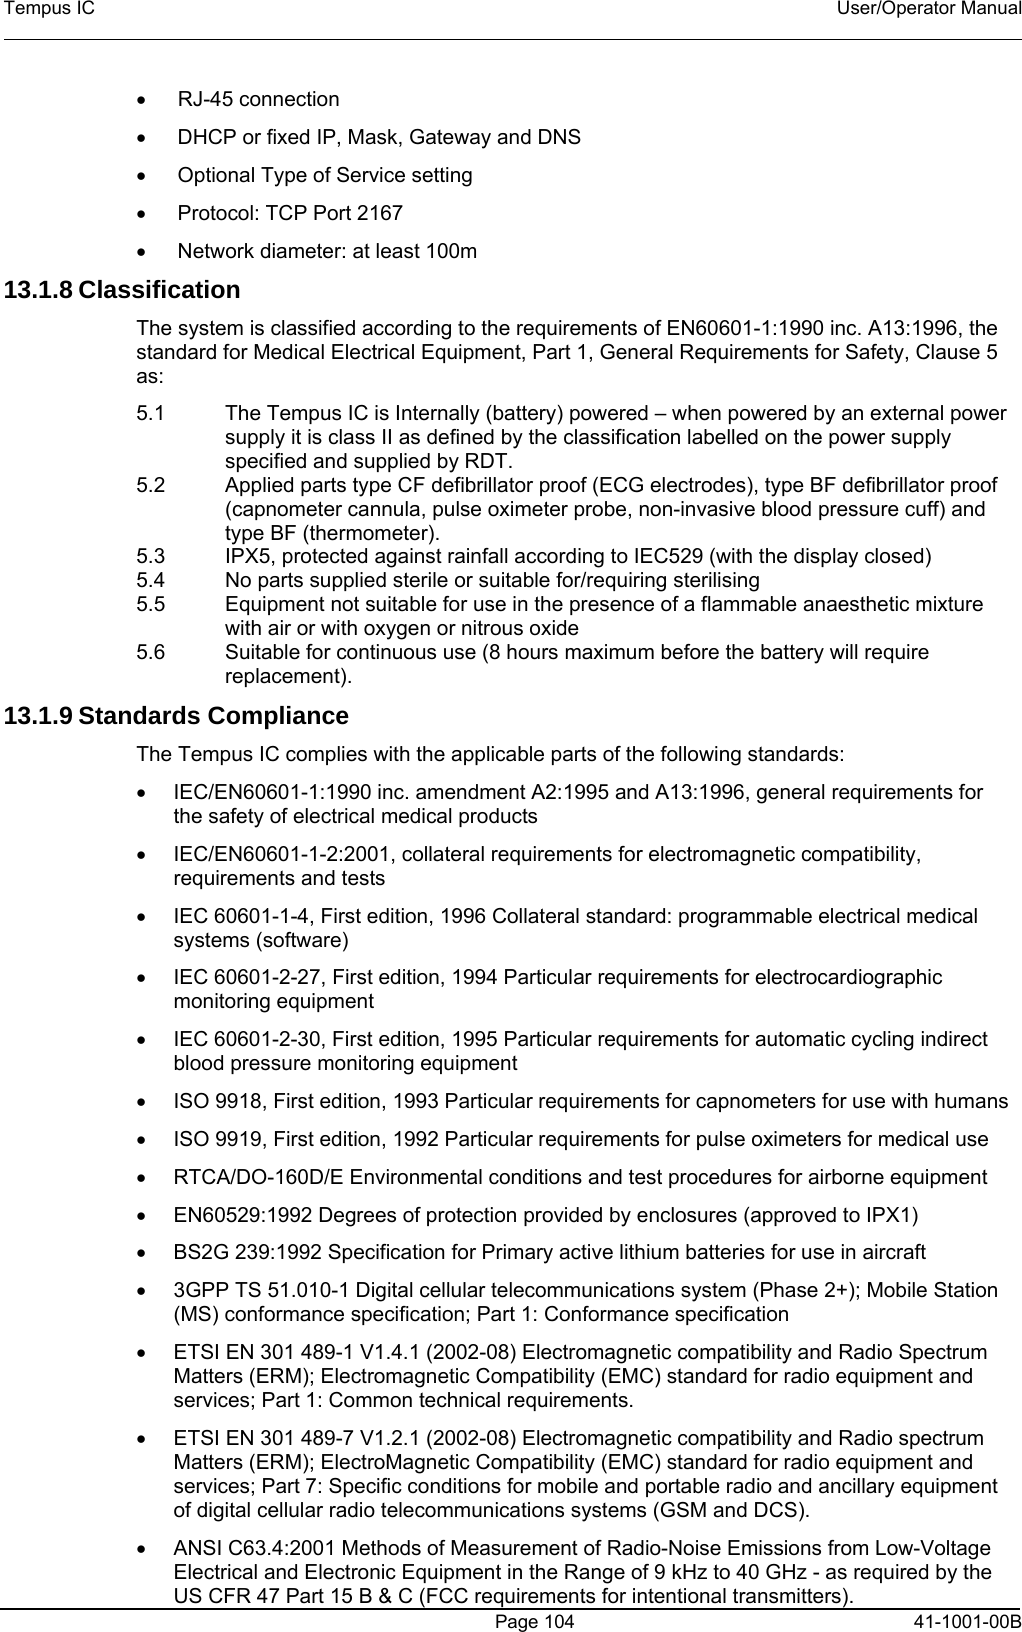 Tempus IC    User/Operator Manual     Page 104  41-1001-00B • RJ-45 connection •  DHCP or fixed IP, Mask, Gateway and DNS •  Optional Type of Service setting •  Protocol: TCP Port 2167 •  Network diameter: at least 100m 13.1.8 Classification The system is classified according to the requirements of EN60601-1:1990 inc. A13:1996, the standard for Medical Electrical Equipment, Part 1, General Requirements for Safety, Clause 5 as: 5.1  The Tempus IC is Internally (battery) powered – when powered by an external power supply it is class II as defined by the classification labelled on the power supply specified and supplied by RDT. 5.2  Applied parts type CF defibrillator proof (ECG electrodes), type BF defibrillator proof (capnometer cannula, pulse oximeter probe, non-invasive blood pressure cuff) and type BF (thermometer). 5.3  IPX5, protected against rainfall according to IEC529 (with the display closed) 5.4  No parts supplied sterile or suitable for/requiring sterilising 5.5  Equipment not suitable for use in the presence of a flammable anaesthetic mixture with air or with oxygen or nitrous oxide 5.6  Suitable for continuous use (8 hours maximum before the battery will require replacement). 13.1.9 Standards Compliance  The Tempus IC complies with the applicable parts of the following standards: •  IEC/EN60601-1:1990 inc. amendment A2:1995 and A13:1996, general requirements for the safety of electrical medical products •  IEC/EN60601-1-2:2001, collateral requirements for electromagnetic compatibility, requirements and tests •  IEC 60601-1-4, First edition, 1996 Collateral standard: programmable electrical medical systems (software) •  IEC 60601-2-27, First edition, 1994 Particular requirements for electrocardiographic monitoring equipment •  IEC 60601-2-30, First edition, 1995 Particular requirements for automatic cycling indirect blood pressure monitoring equipment •  ISO 9918, First edition, 1993 Particular requirements for capnometers for use with humans •  ISO 9919, First edition, 1992 Particular requirements for pulse oximeters for medical use •  RTCA/DO-160D/E Environmental conditions and test procedures for airborne equipment •  EN60529:1992 Degrees of protection provided by enclosures (approved to IPX1) •  BS2G 239:1992 Specification for Primary active lithium batteries for use in aircraft •  3GPP TS 51.010-1 Digital cellular telecommunications system (Phase 2+); Mobile Station (MS) conformance specification; Part 1: Conformance specification •  ETSI EN 301 489-1 V1.4.1 (2002-08) Electromagnetic compatibility and Radio Spectrum Matters (ERM); Electromagnetic Compatibility (EMC) standard for radio equipment and services; Part 1: Common technical requirements. •  ETSI EN 301 489-7 V1.2.1 (2002-08) Electromagnetic compatibility and Radio spectrum Matters (ERM); ElectroMagnetic Compatibility (EMC) standard for radio equipment and services; Part 7: Specific conditions for mobile and portable radio and ancillary equipment of digital cellular radio telecommunications systems (GSM and DCS). •  ANSI C63.4:2001 Methods of Measurement of Radio-Noise Emissions from Low-Voltage Electrical and Electronic Equipment in the Range of 9 kHz to 40 GHz - as required by the US CFR 47 Part 15 B &amp; C (FCC requirements for intentional transmitters). 